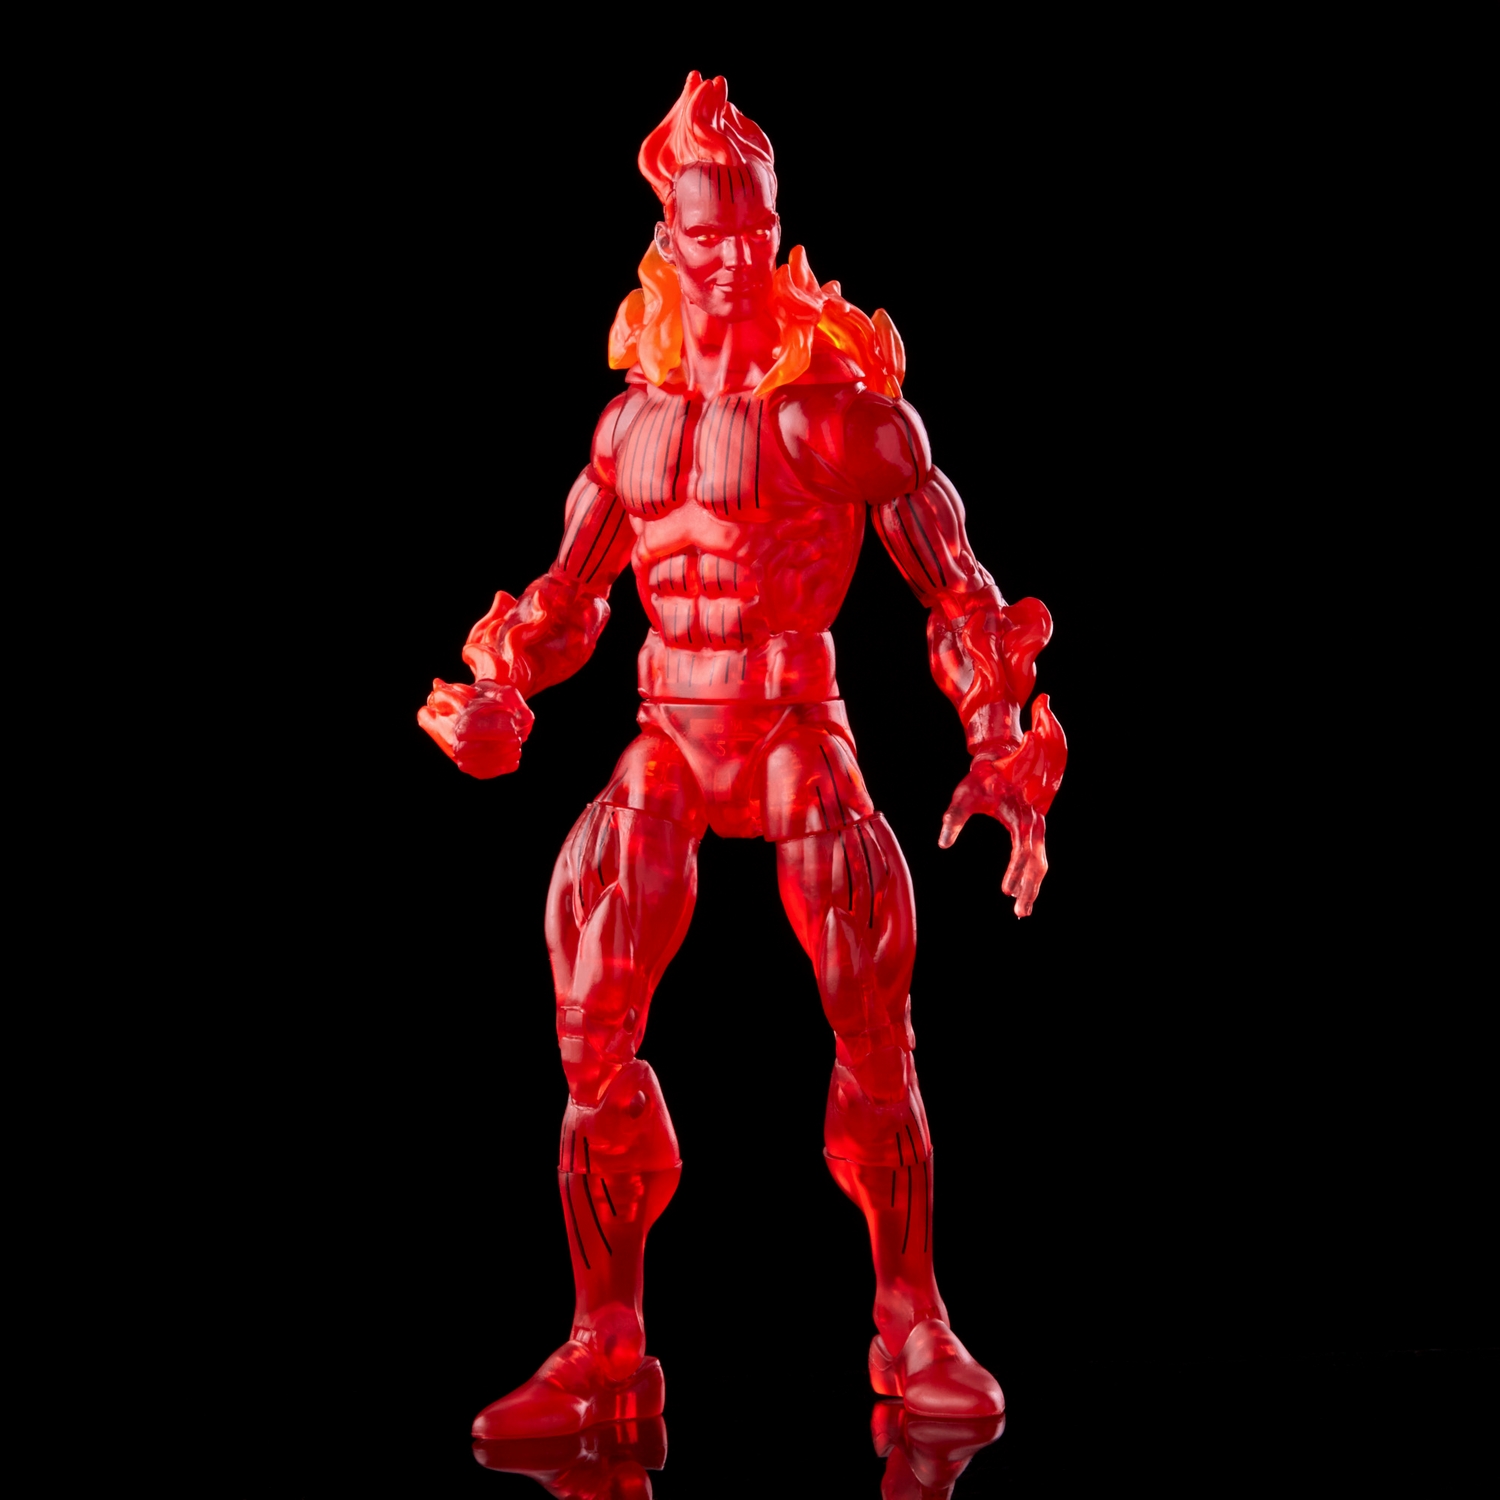 MARVEL LEGENDS SERIES 6-INCH RETRO FANTASTIC FOUR THE HUMAN TORCH Figure_oop 9.jpg